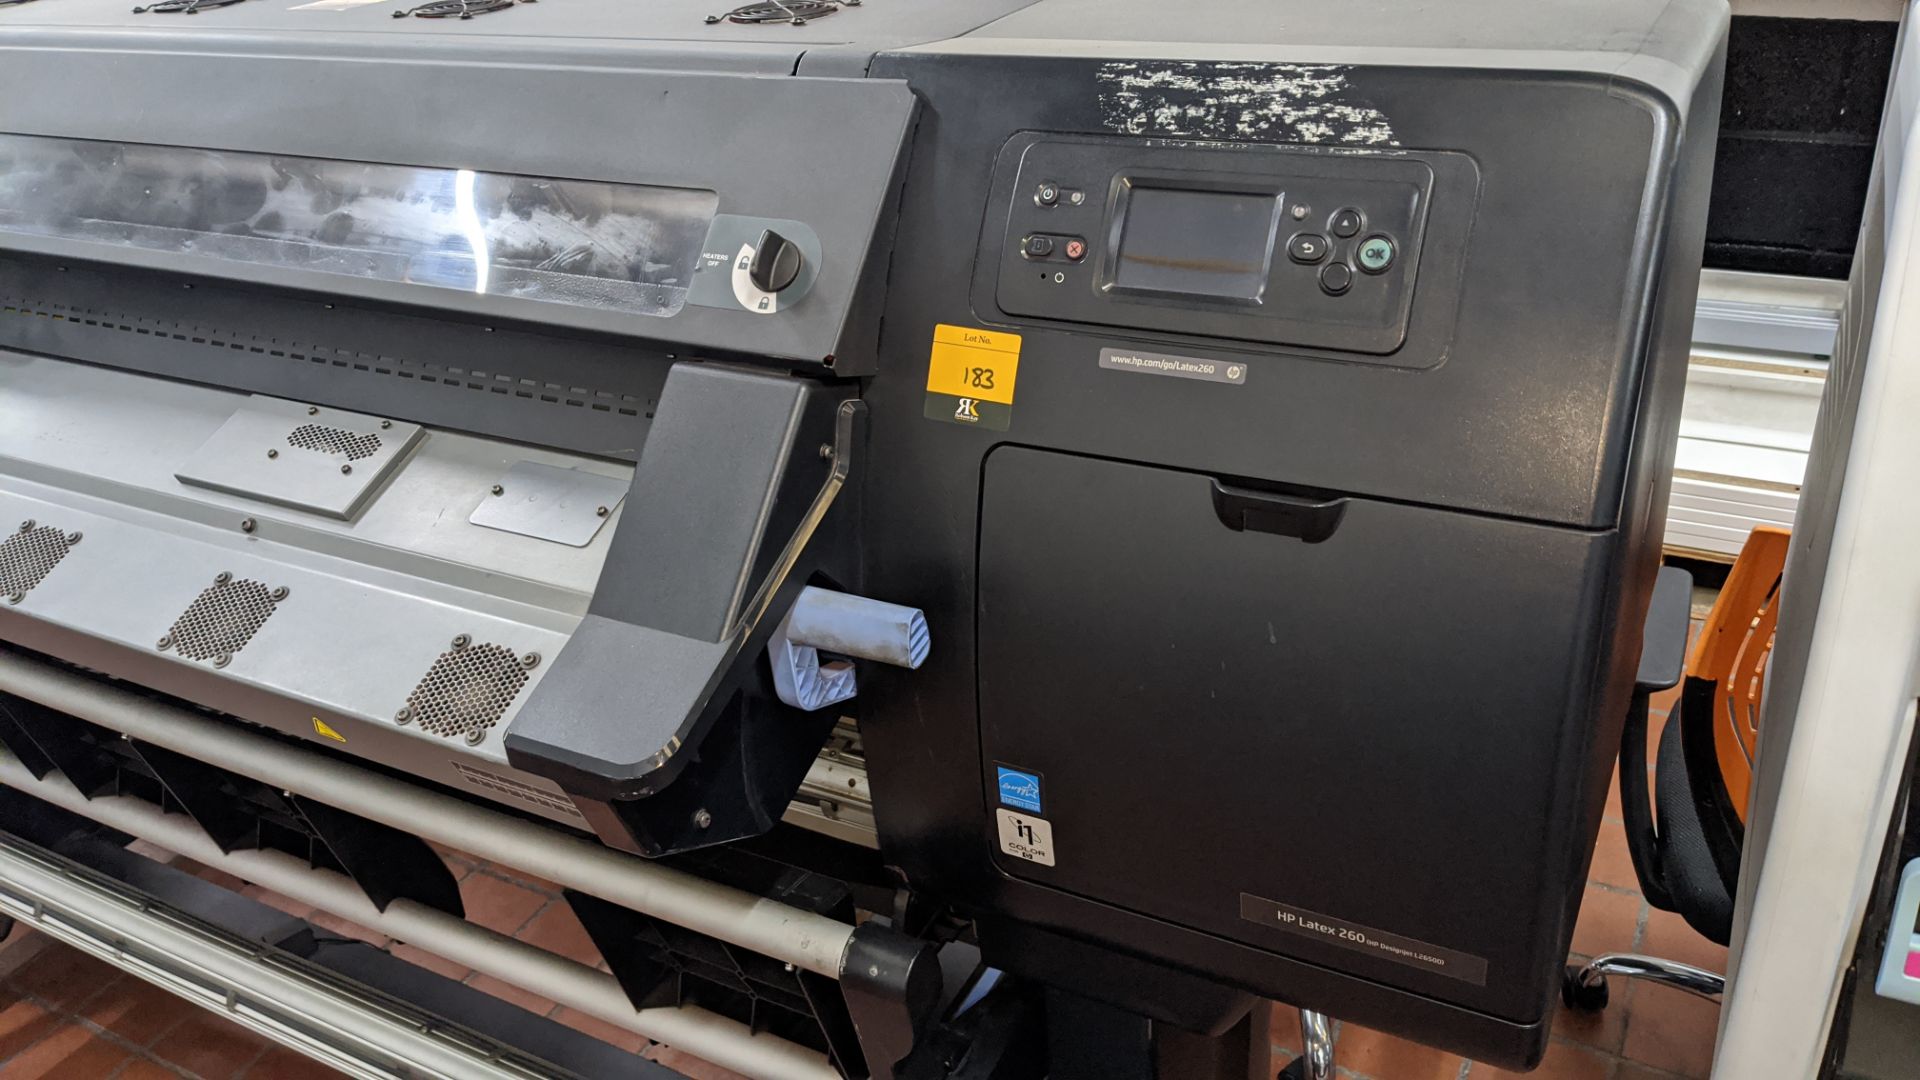 HP latex 260 (HP DesignJet L26500) wide format printer, product number CQ869A (61" capacity). - Image 9 of 9